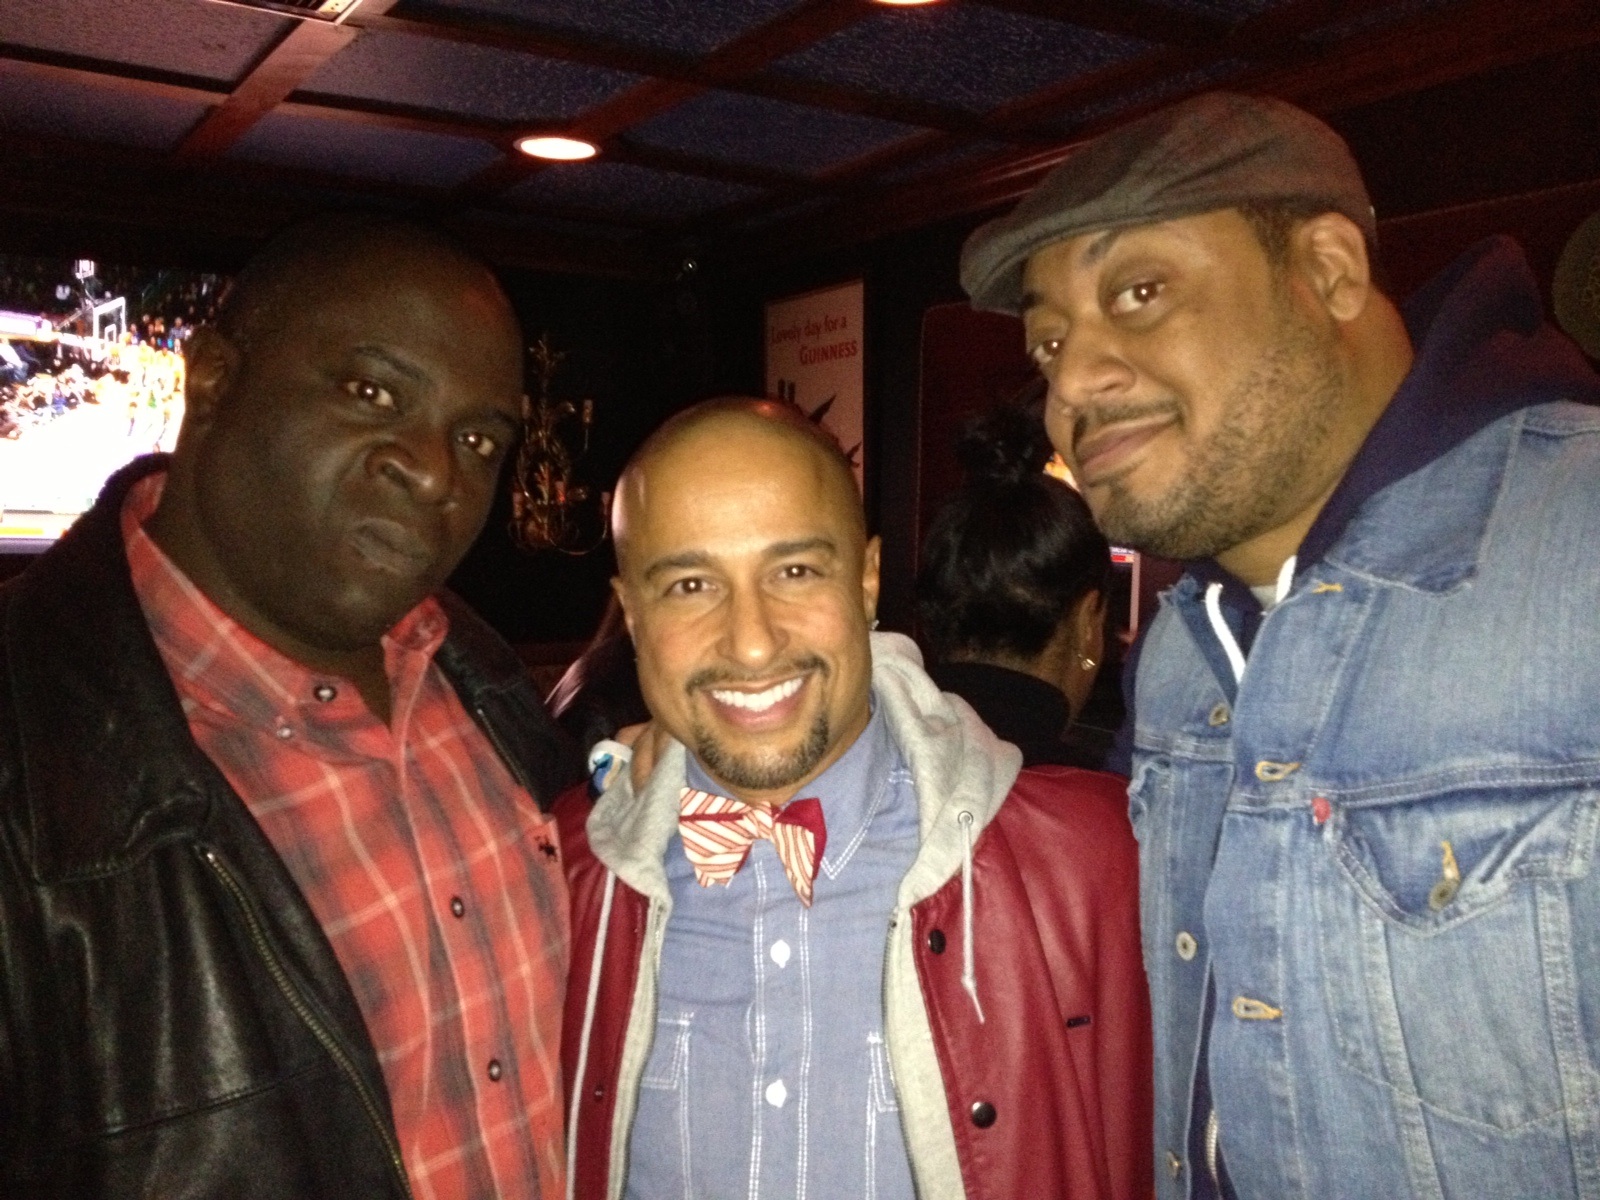 Artistic Director/Choreographer Chuck Maldonado and Actors/Comedians Gary Anthony Williams and Cedric Yarborough at the House Party 5 